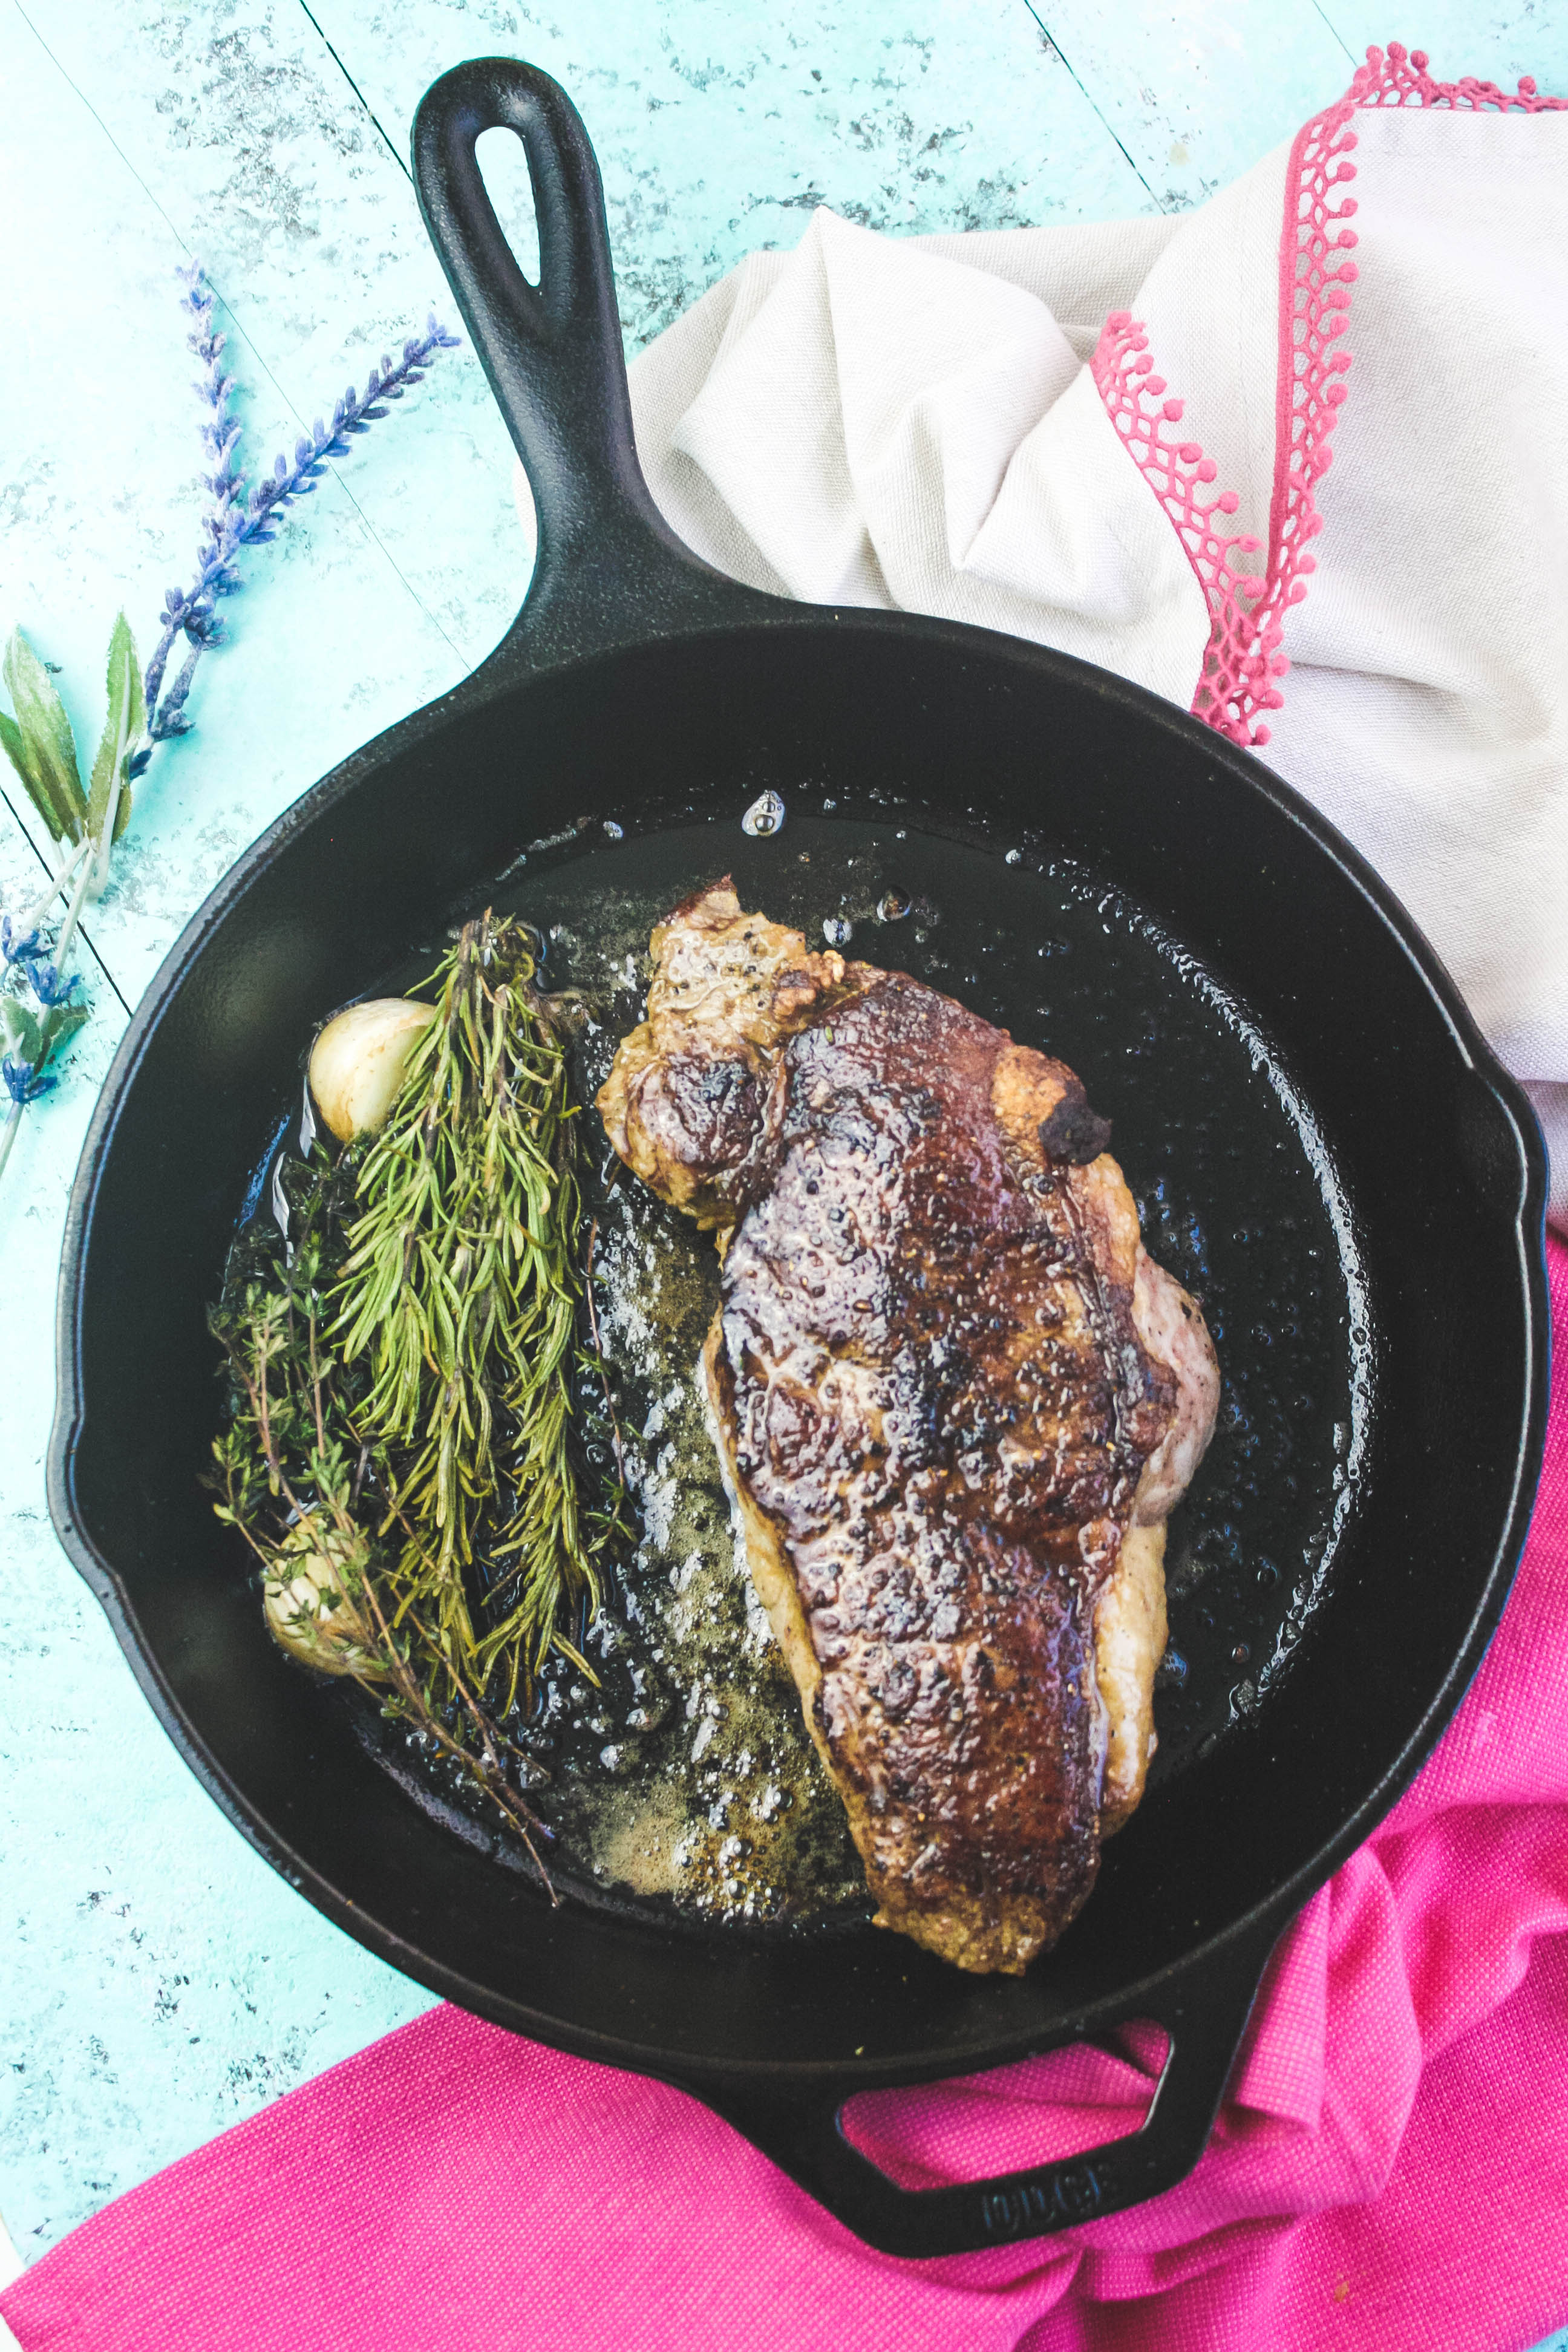 Skillet-Cooked NY Strip Steak with Chimichurri Sauce is lovely and so flavorful for a nice main dish. Skillet-Cooked NY Strip Steak with Chimichurri Sauce is a delightful dish for your next special meal.